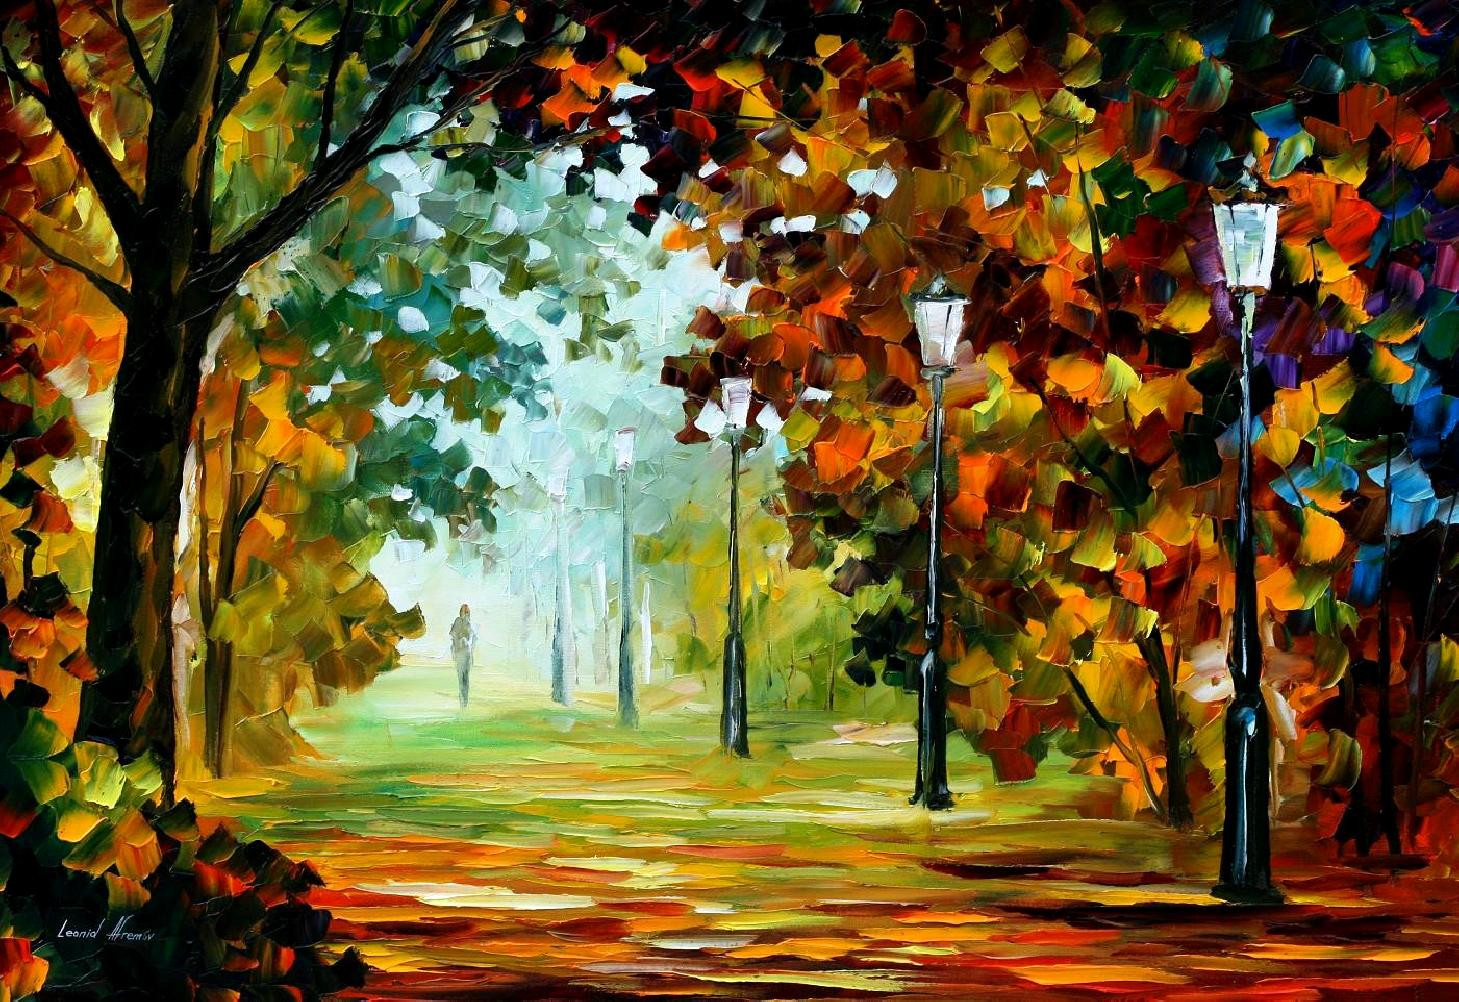 Landscape Paintings By Famous Artists
 MORNING LIGHT 2 — PALETTE KNIFE Oil Painting Canvas By